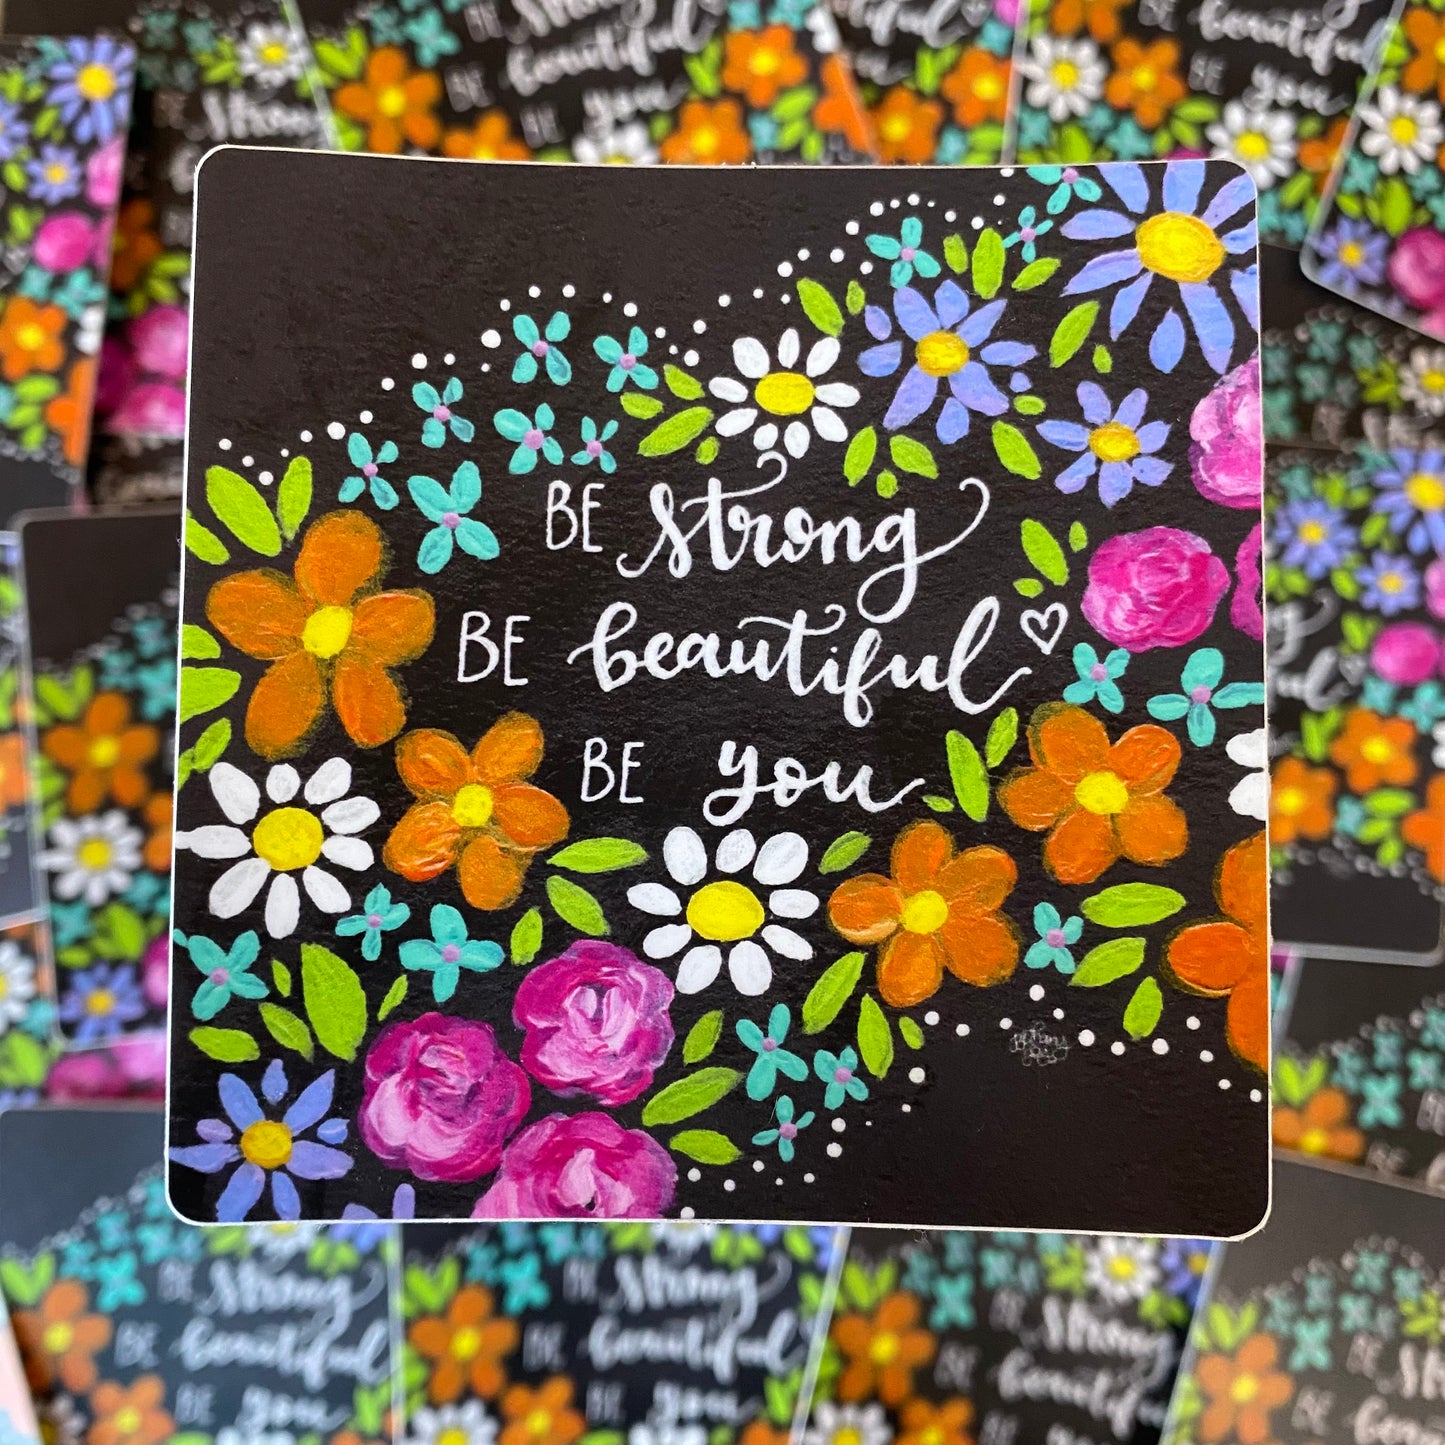 Beautiful You Floral Vinyl Sticker - October 2021 Sticker of the Month